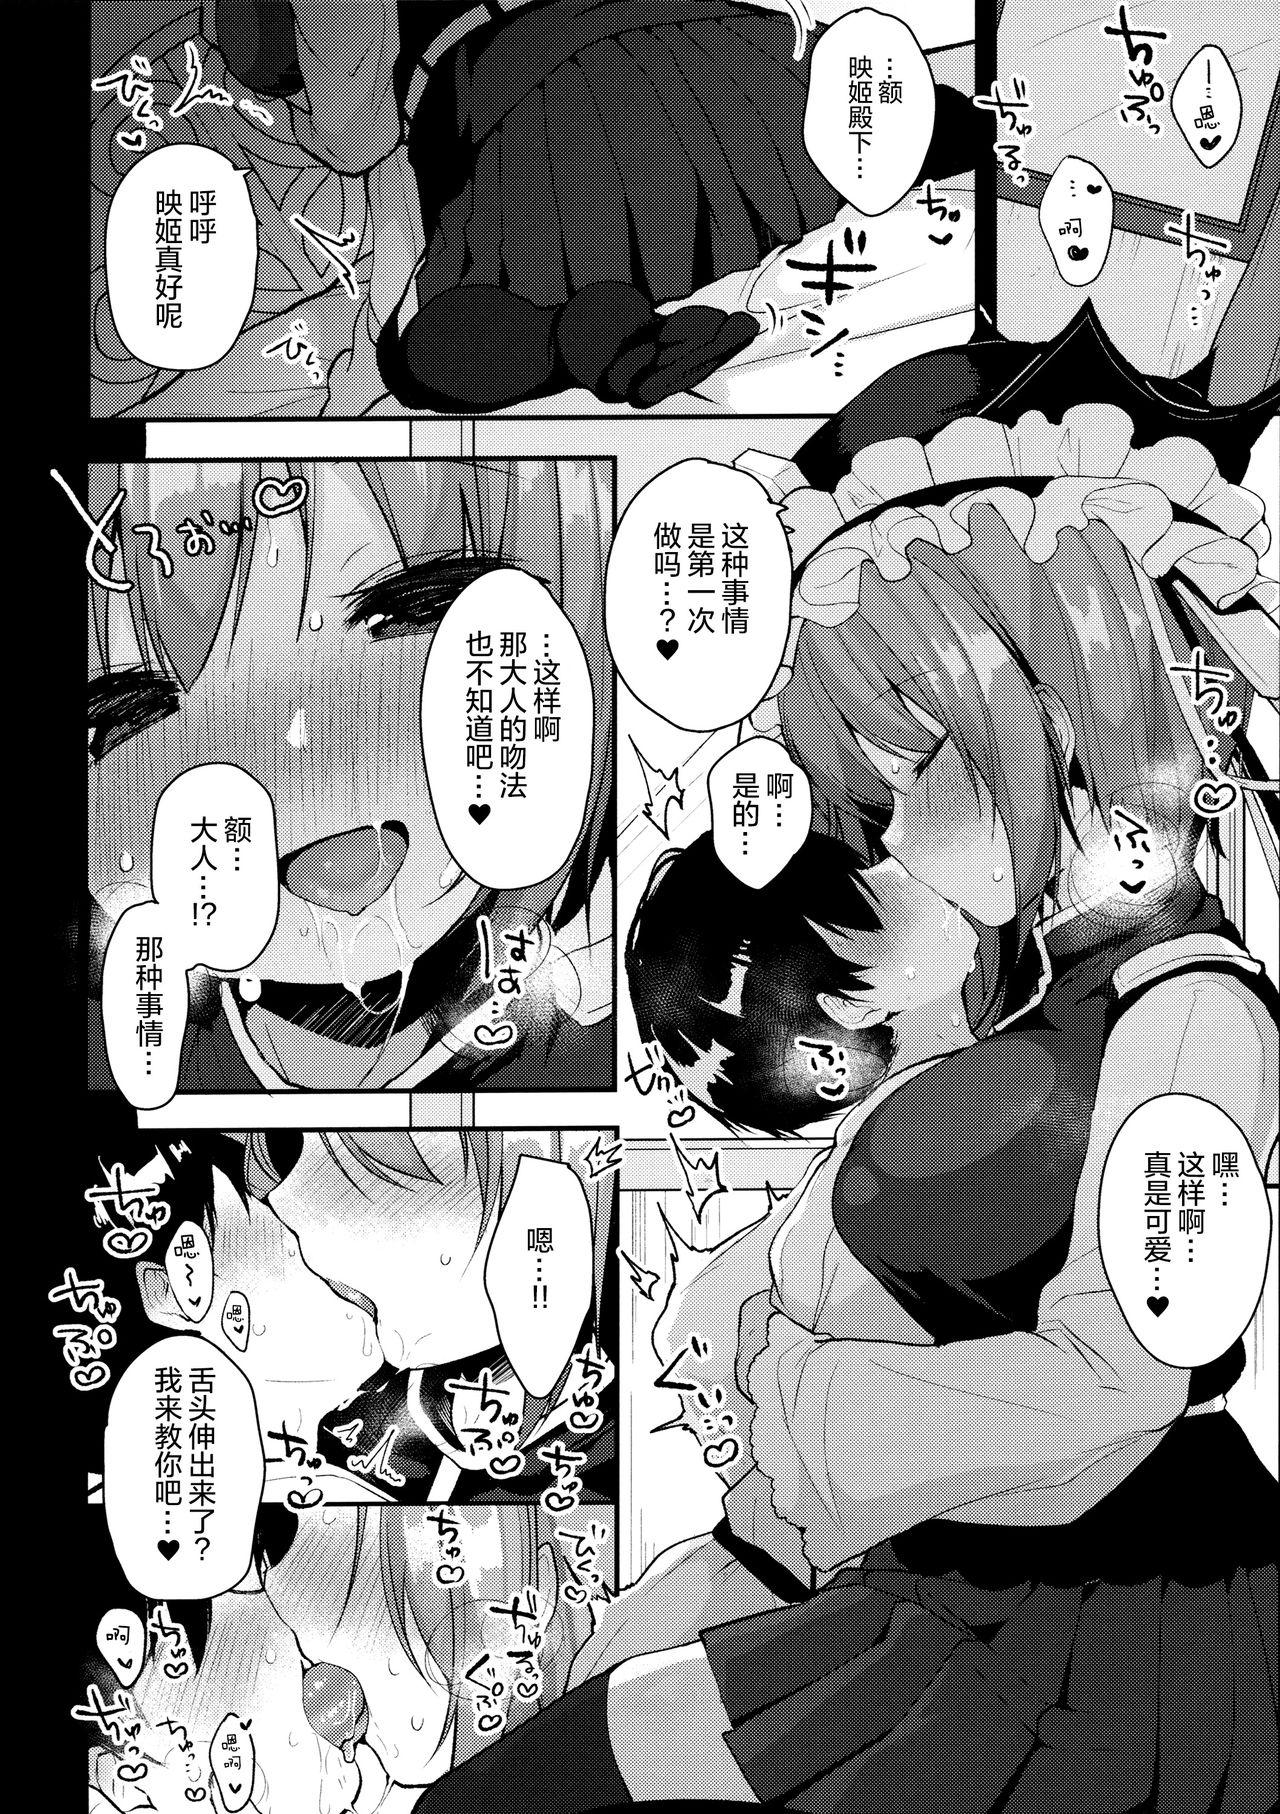 Exhibition Ichinichi Kanojo. - Touhou project Oral Sex - Page 7